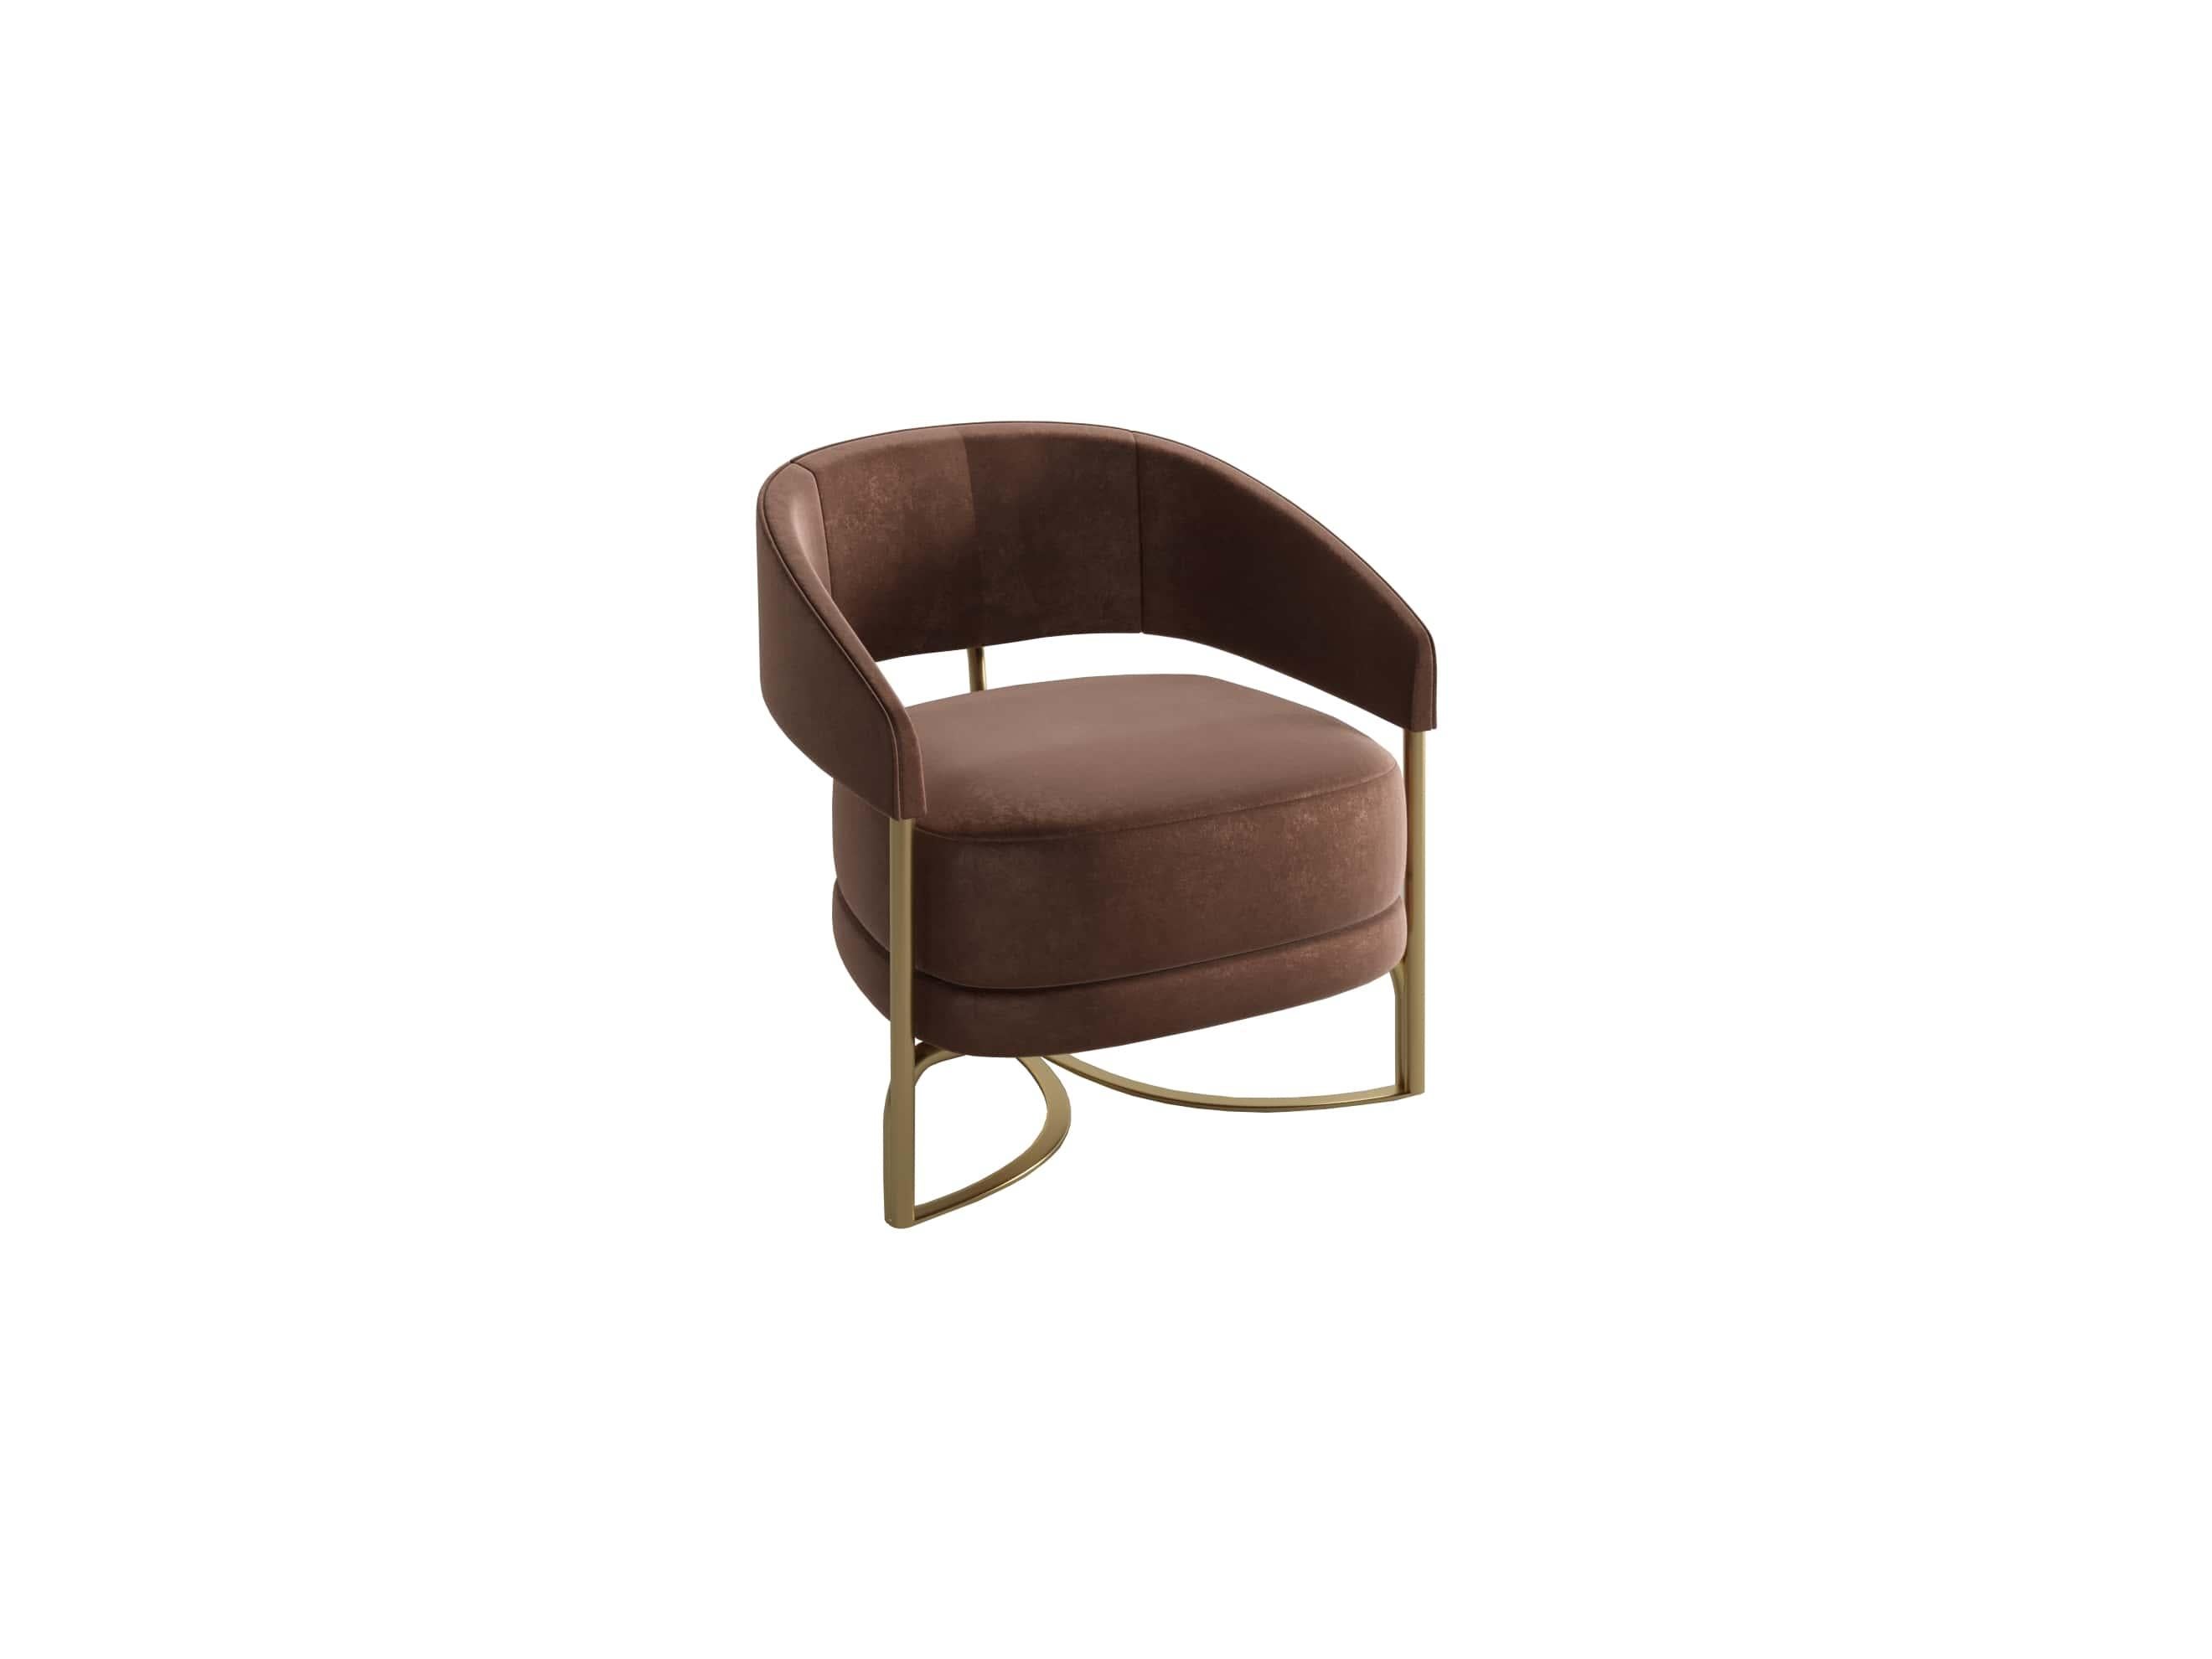 DISCO is the armchair where timeless elegance meets modern allure. This upholstered armchair features a sophisticated fusion of comfort and style, boasting a metal structure with a sleek lacquered iron base. Its classic design seamlessly integrates